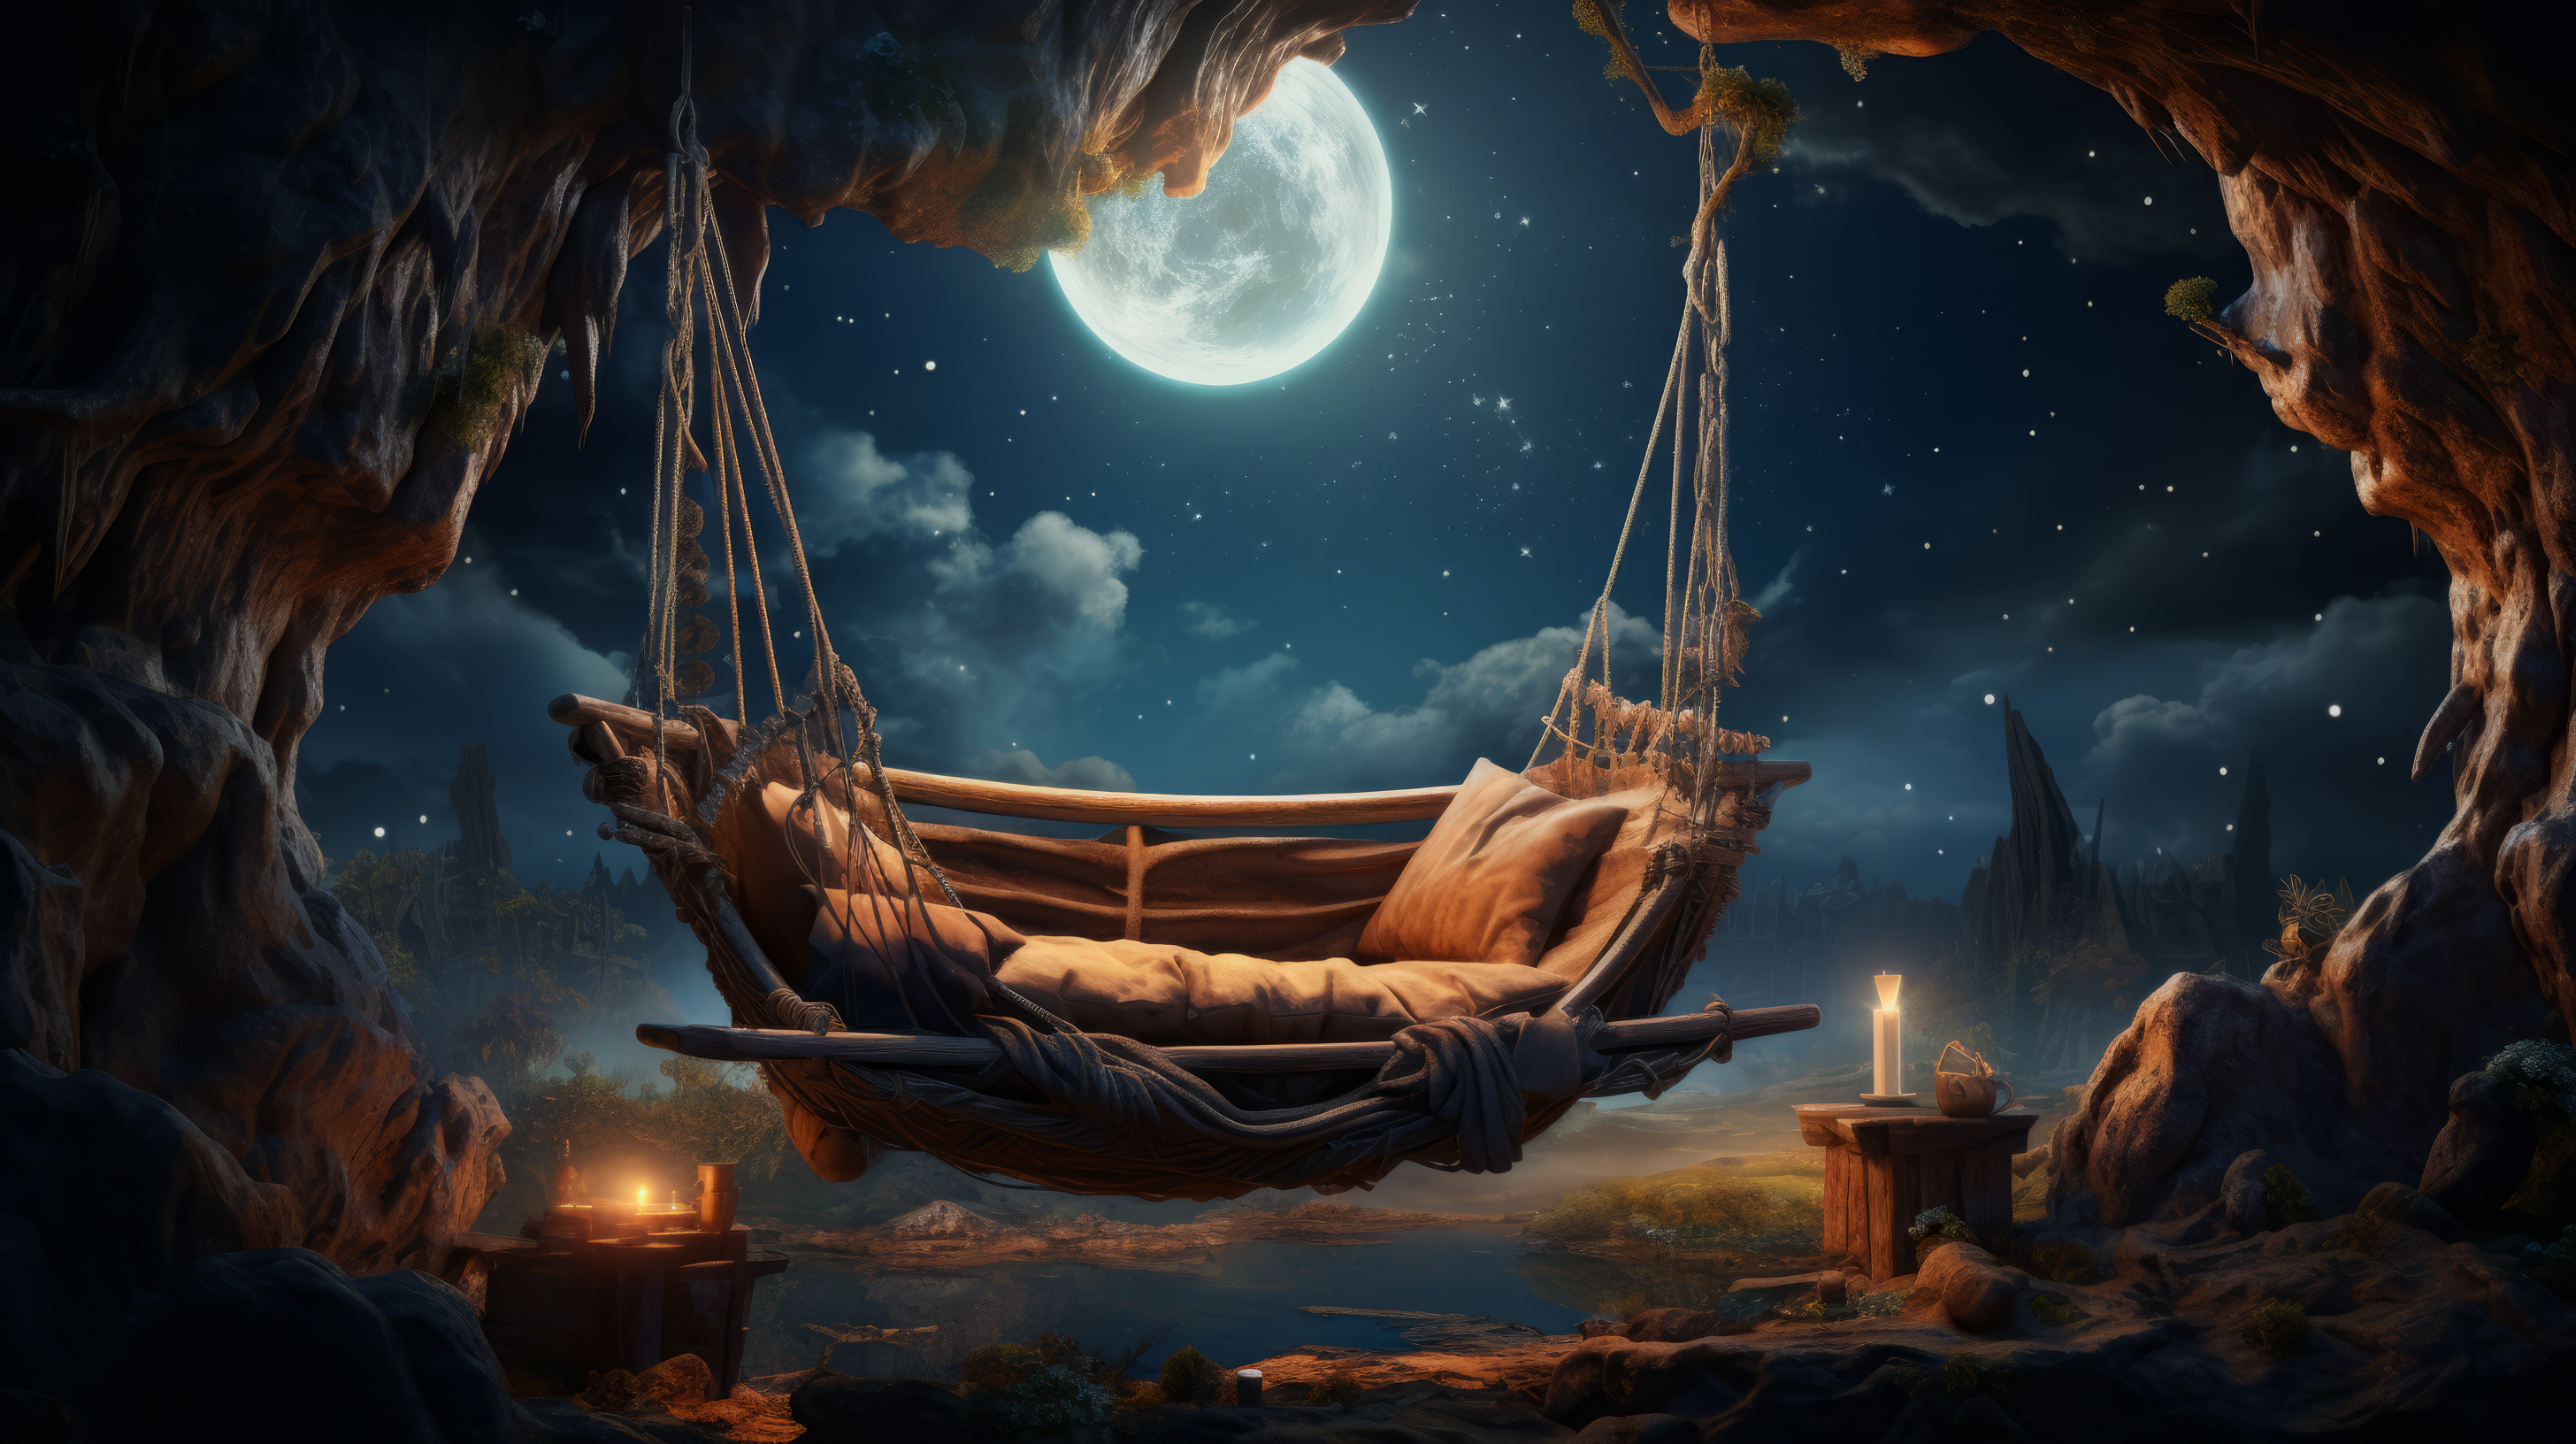 AI-generated art of a serene hammock scene with a moonlit sky, perfect for an HD desktop wallpaper and background with a dreamy atmosphere.